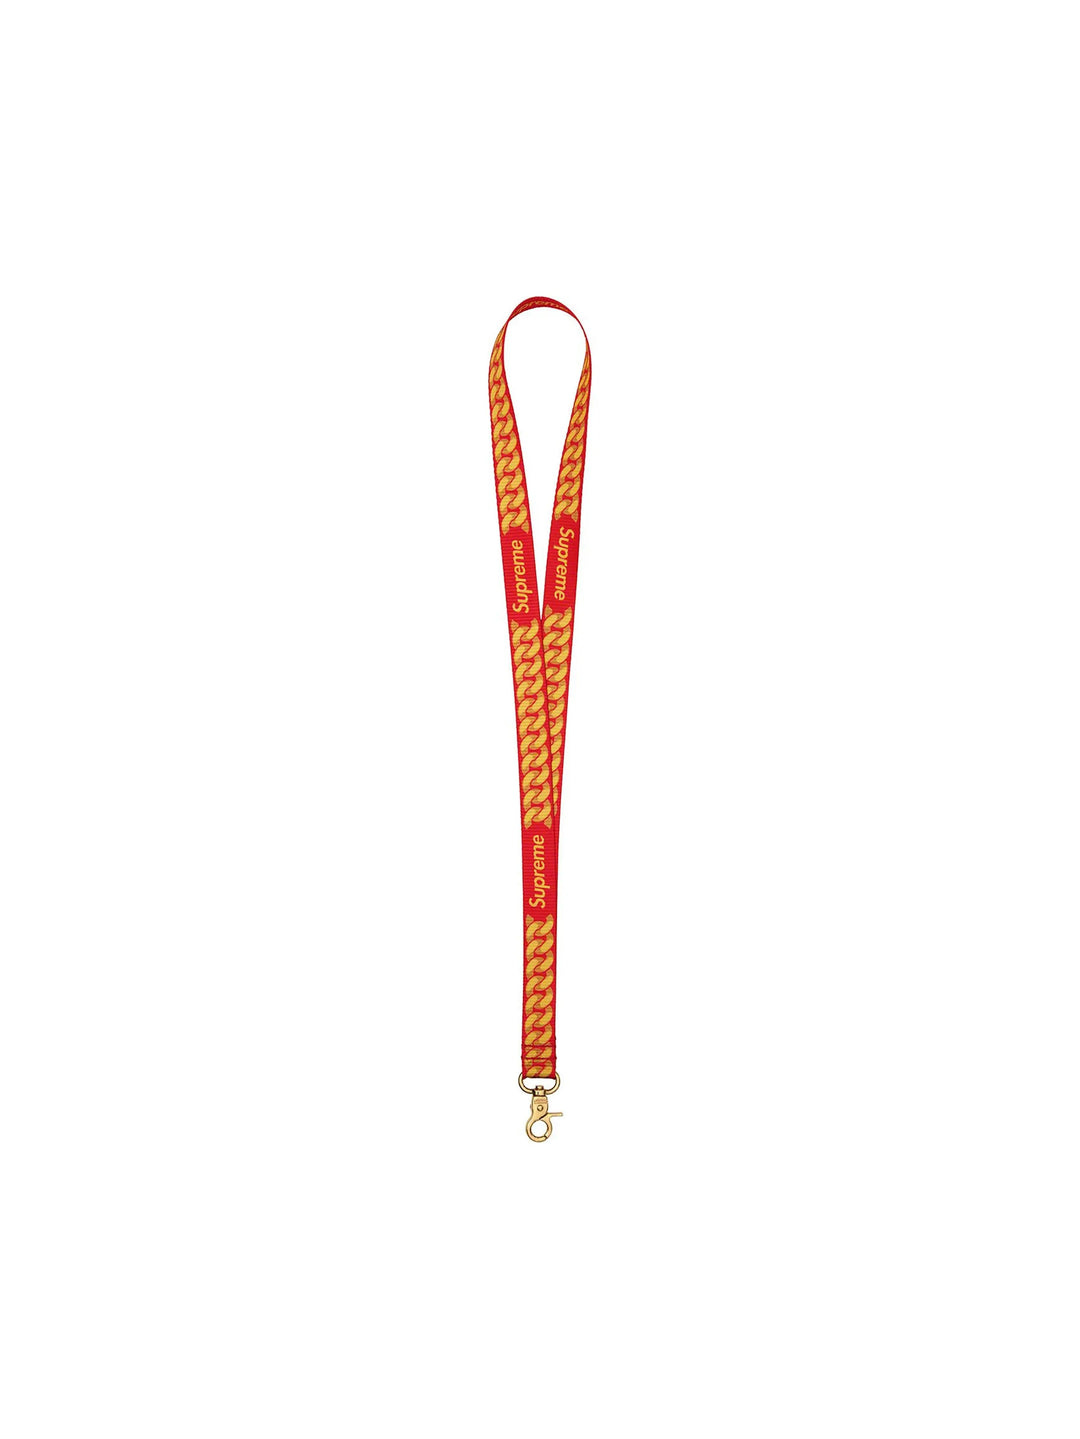 Supreme Cuban Links Lanyard Red in Auckland, New Zealand - Shop name